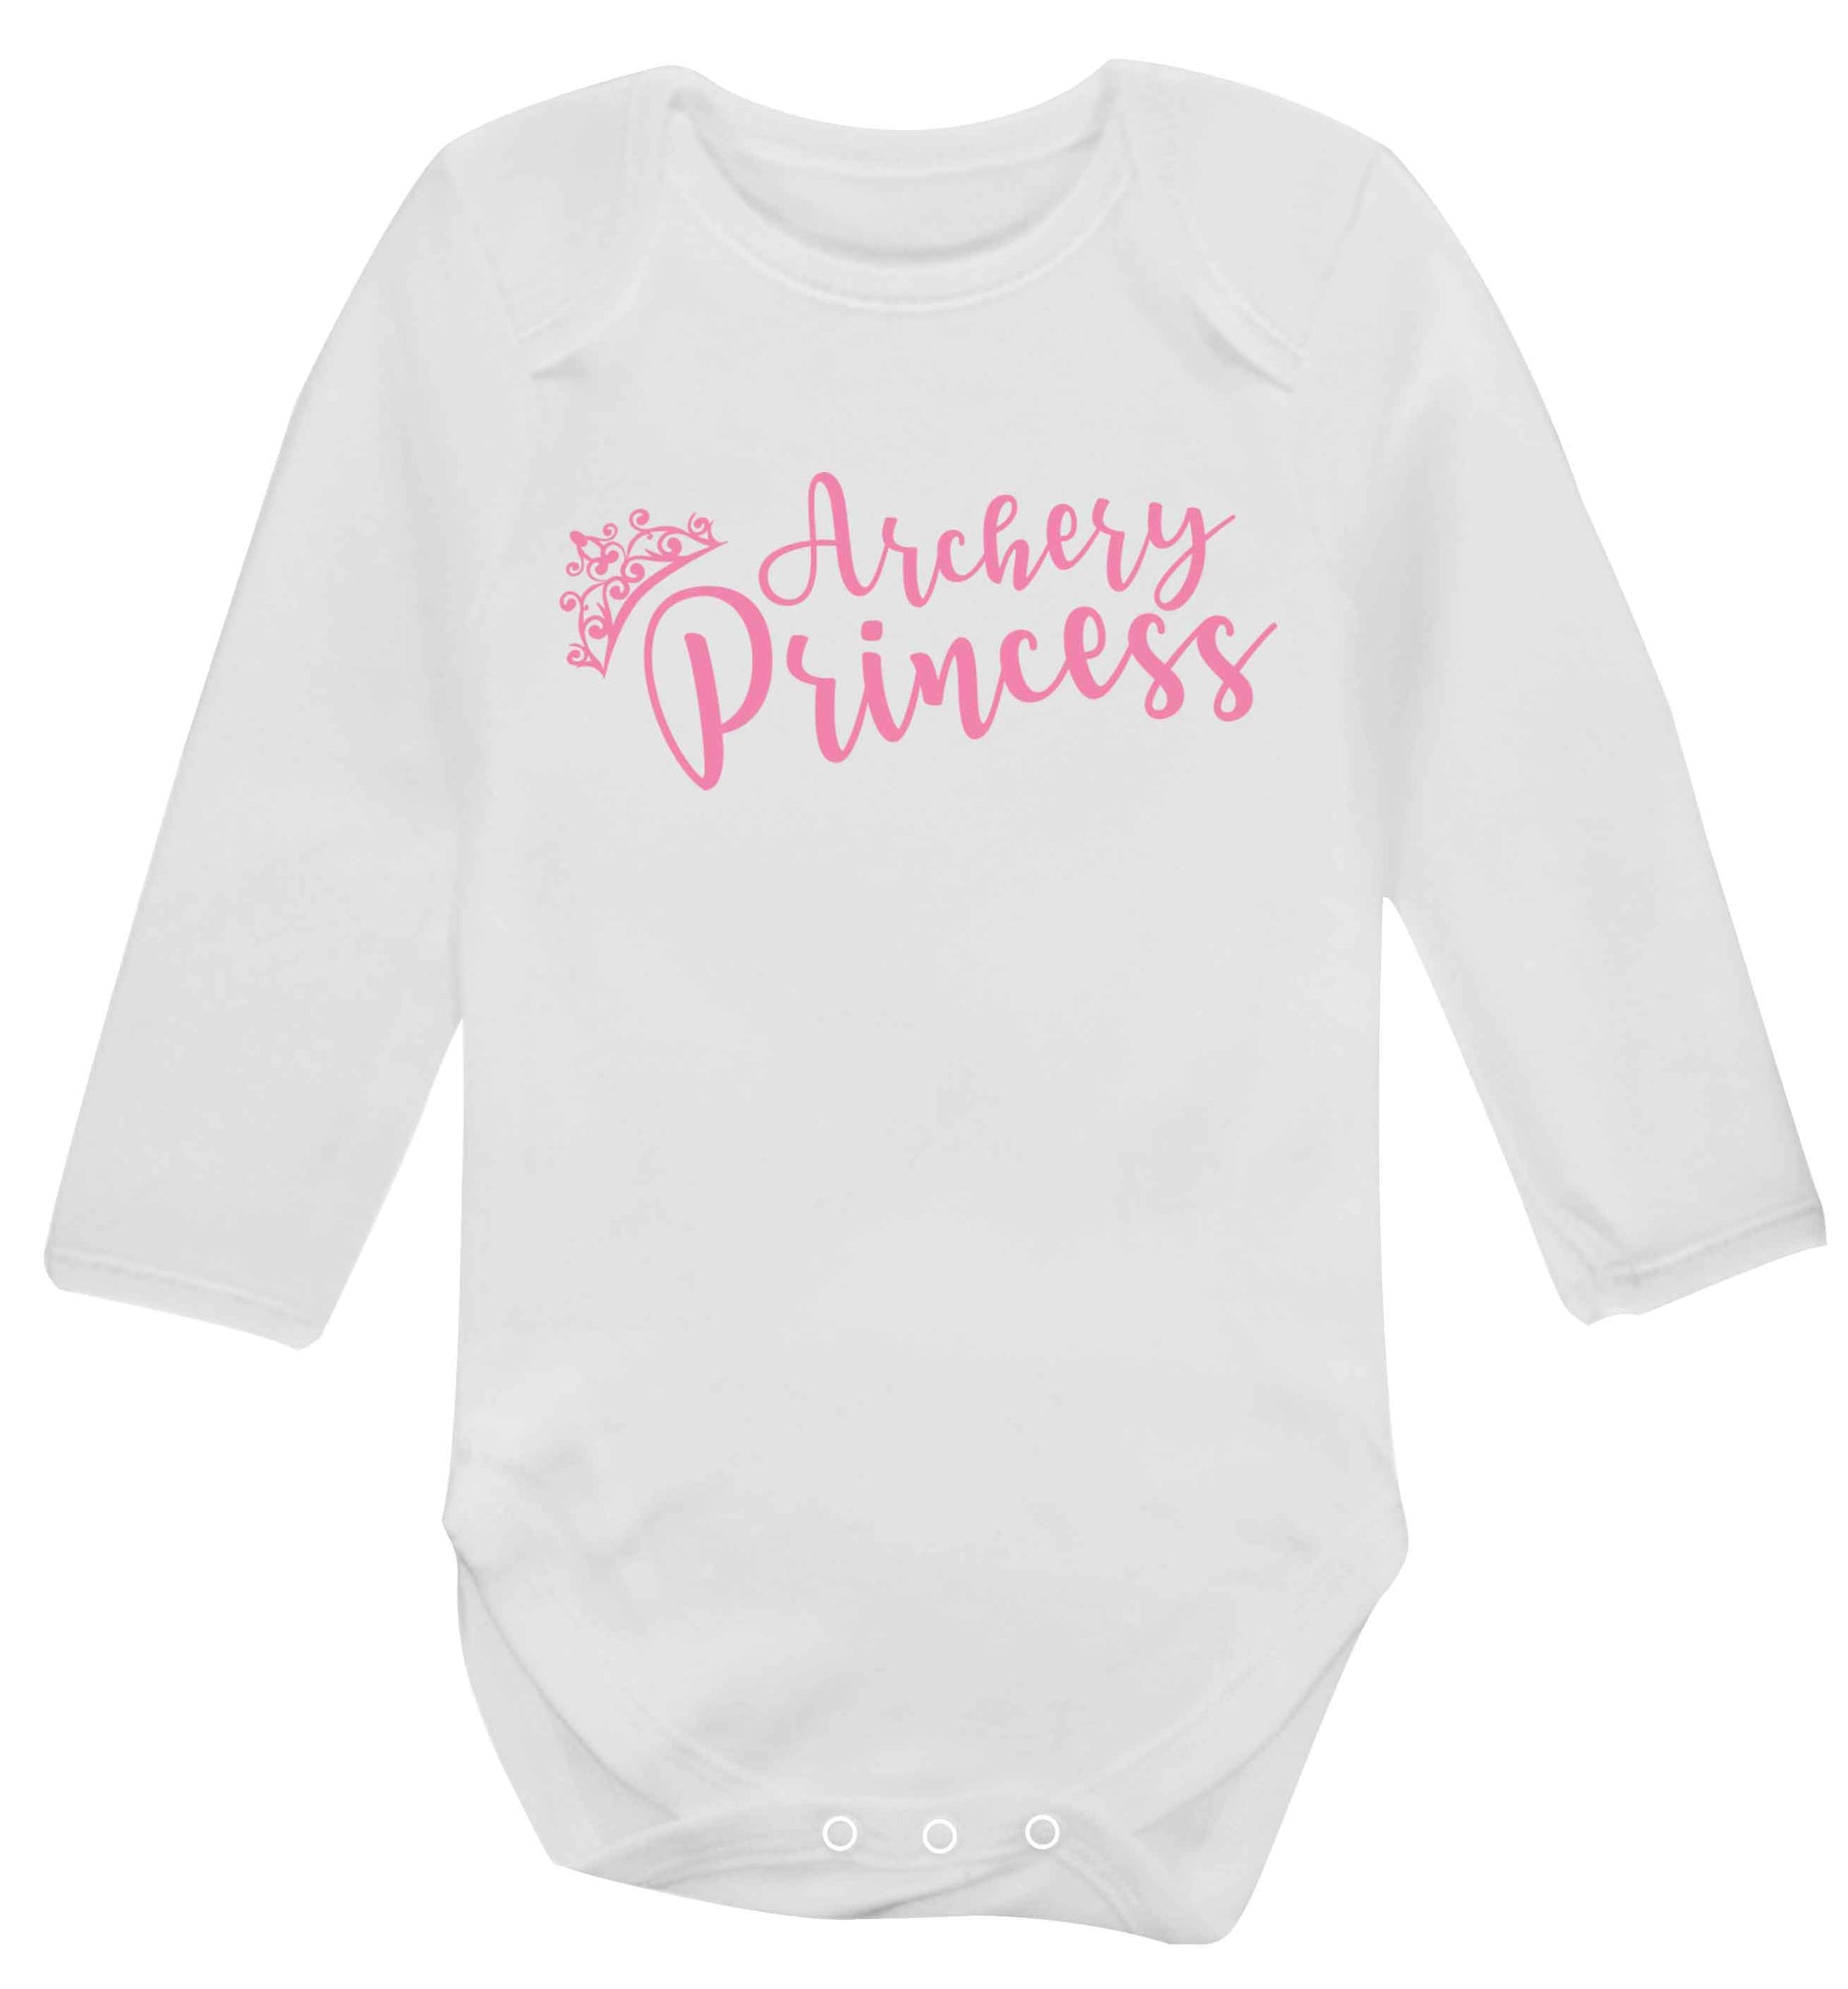 Archery princess Baby Vest long sleeved white 6-12 months